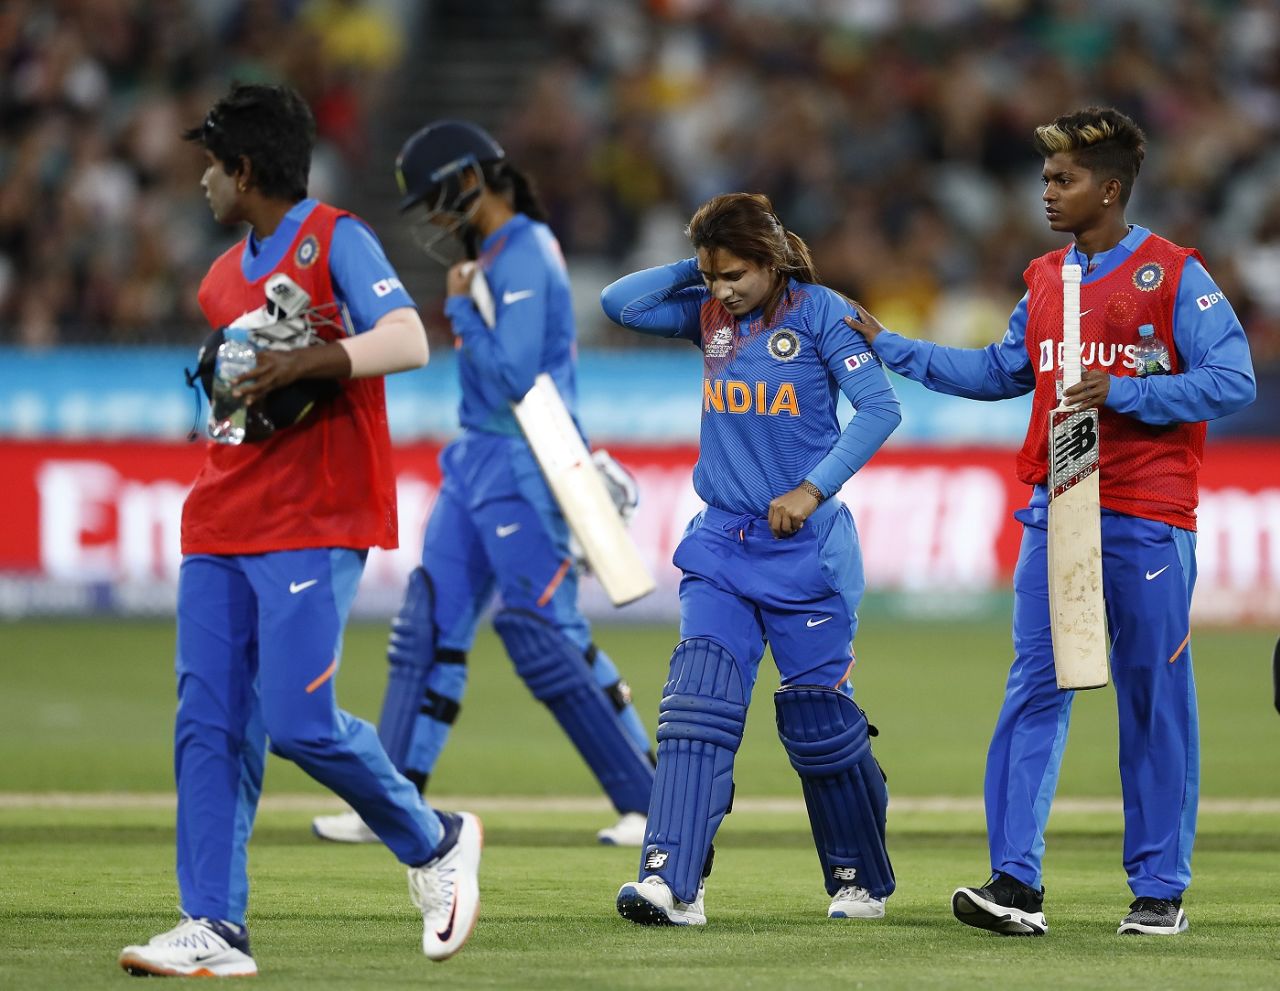 Taniya Bhatia had to retire hurt after being hit by a Jess Jonassen delivery, Australia v India, final, Women's T20 World Cup, Melbourne, March 8, 2020